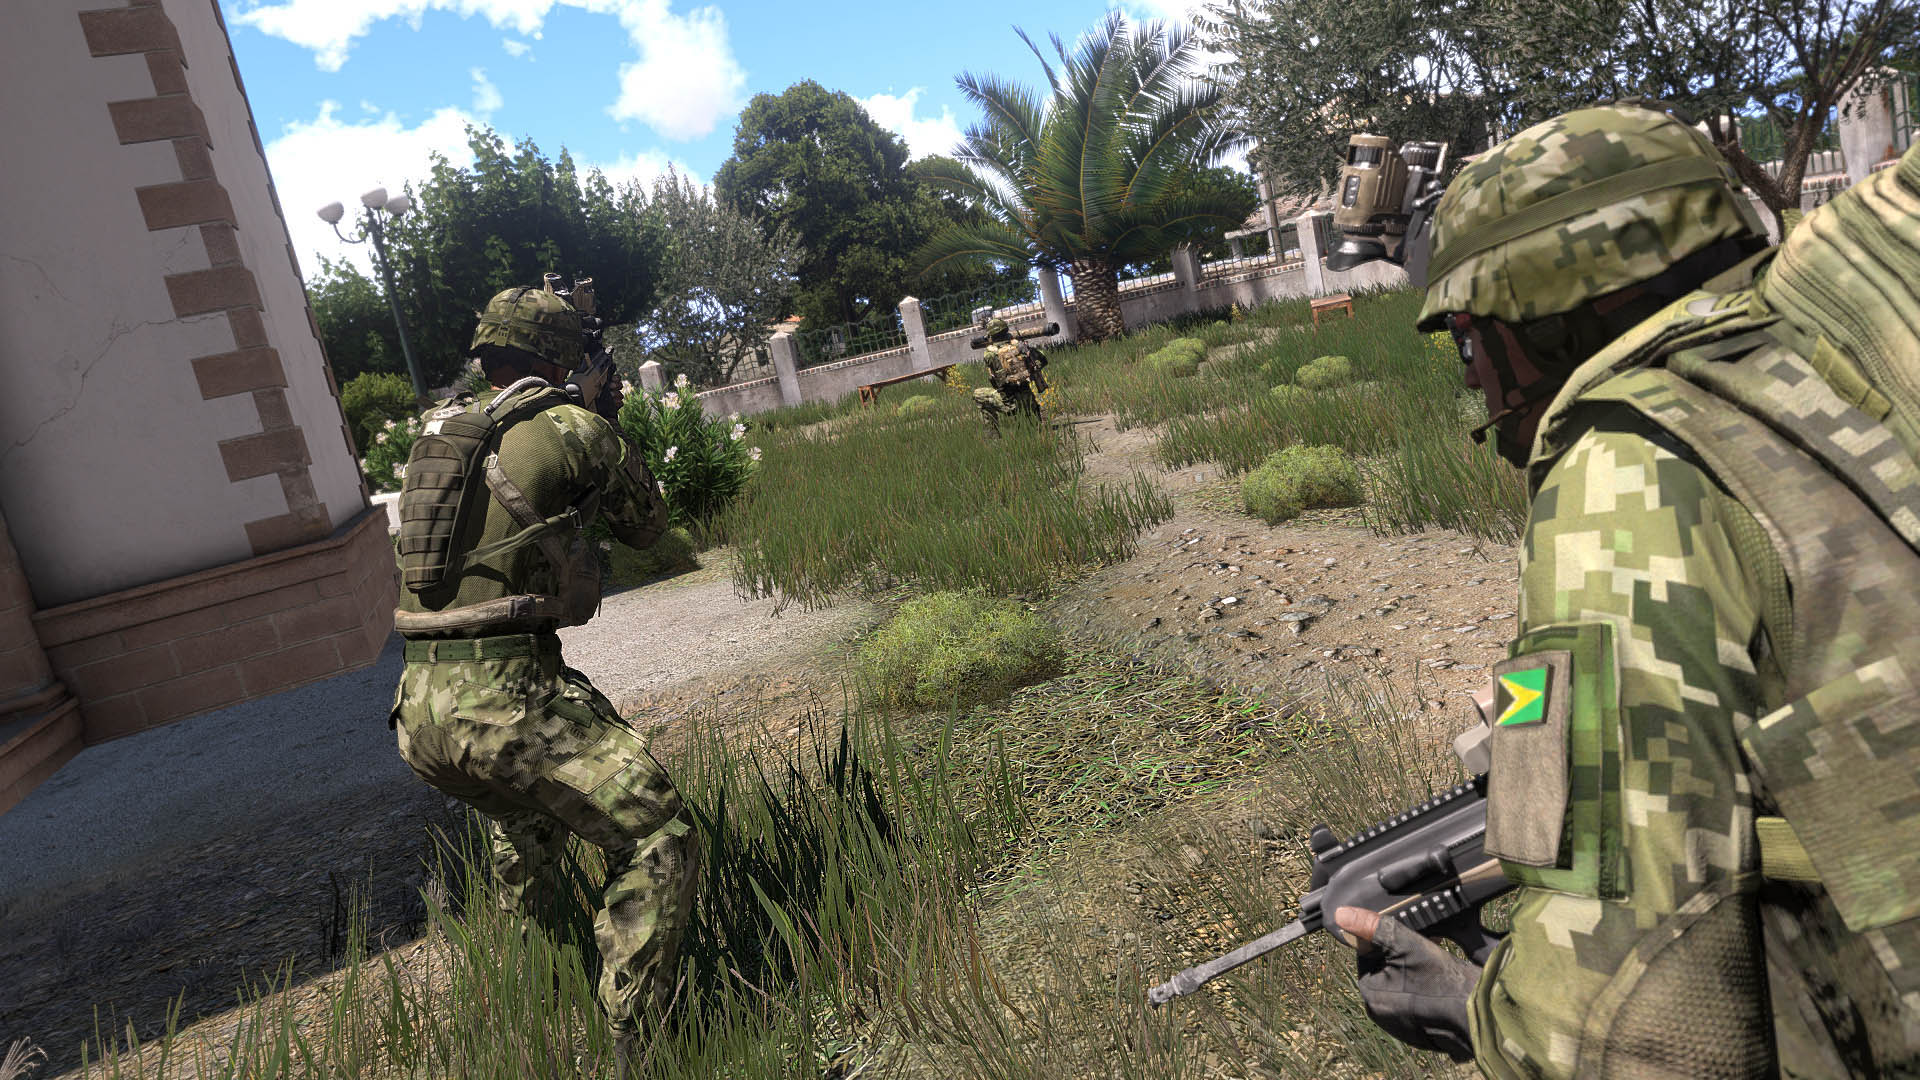 Bohemia Interactive’s Arma 3 Footage Used For Disinformation In Ongoing Conflicts